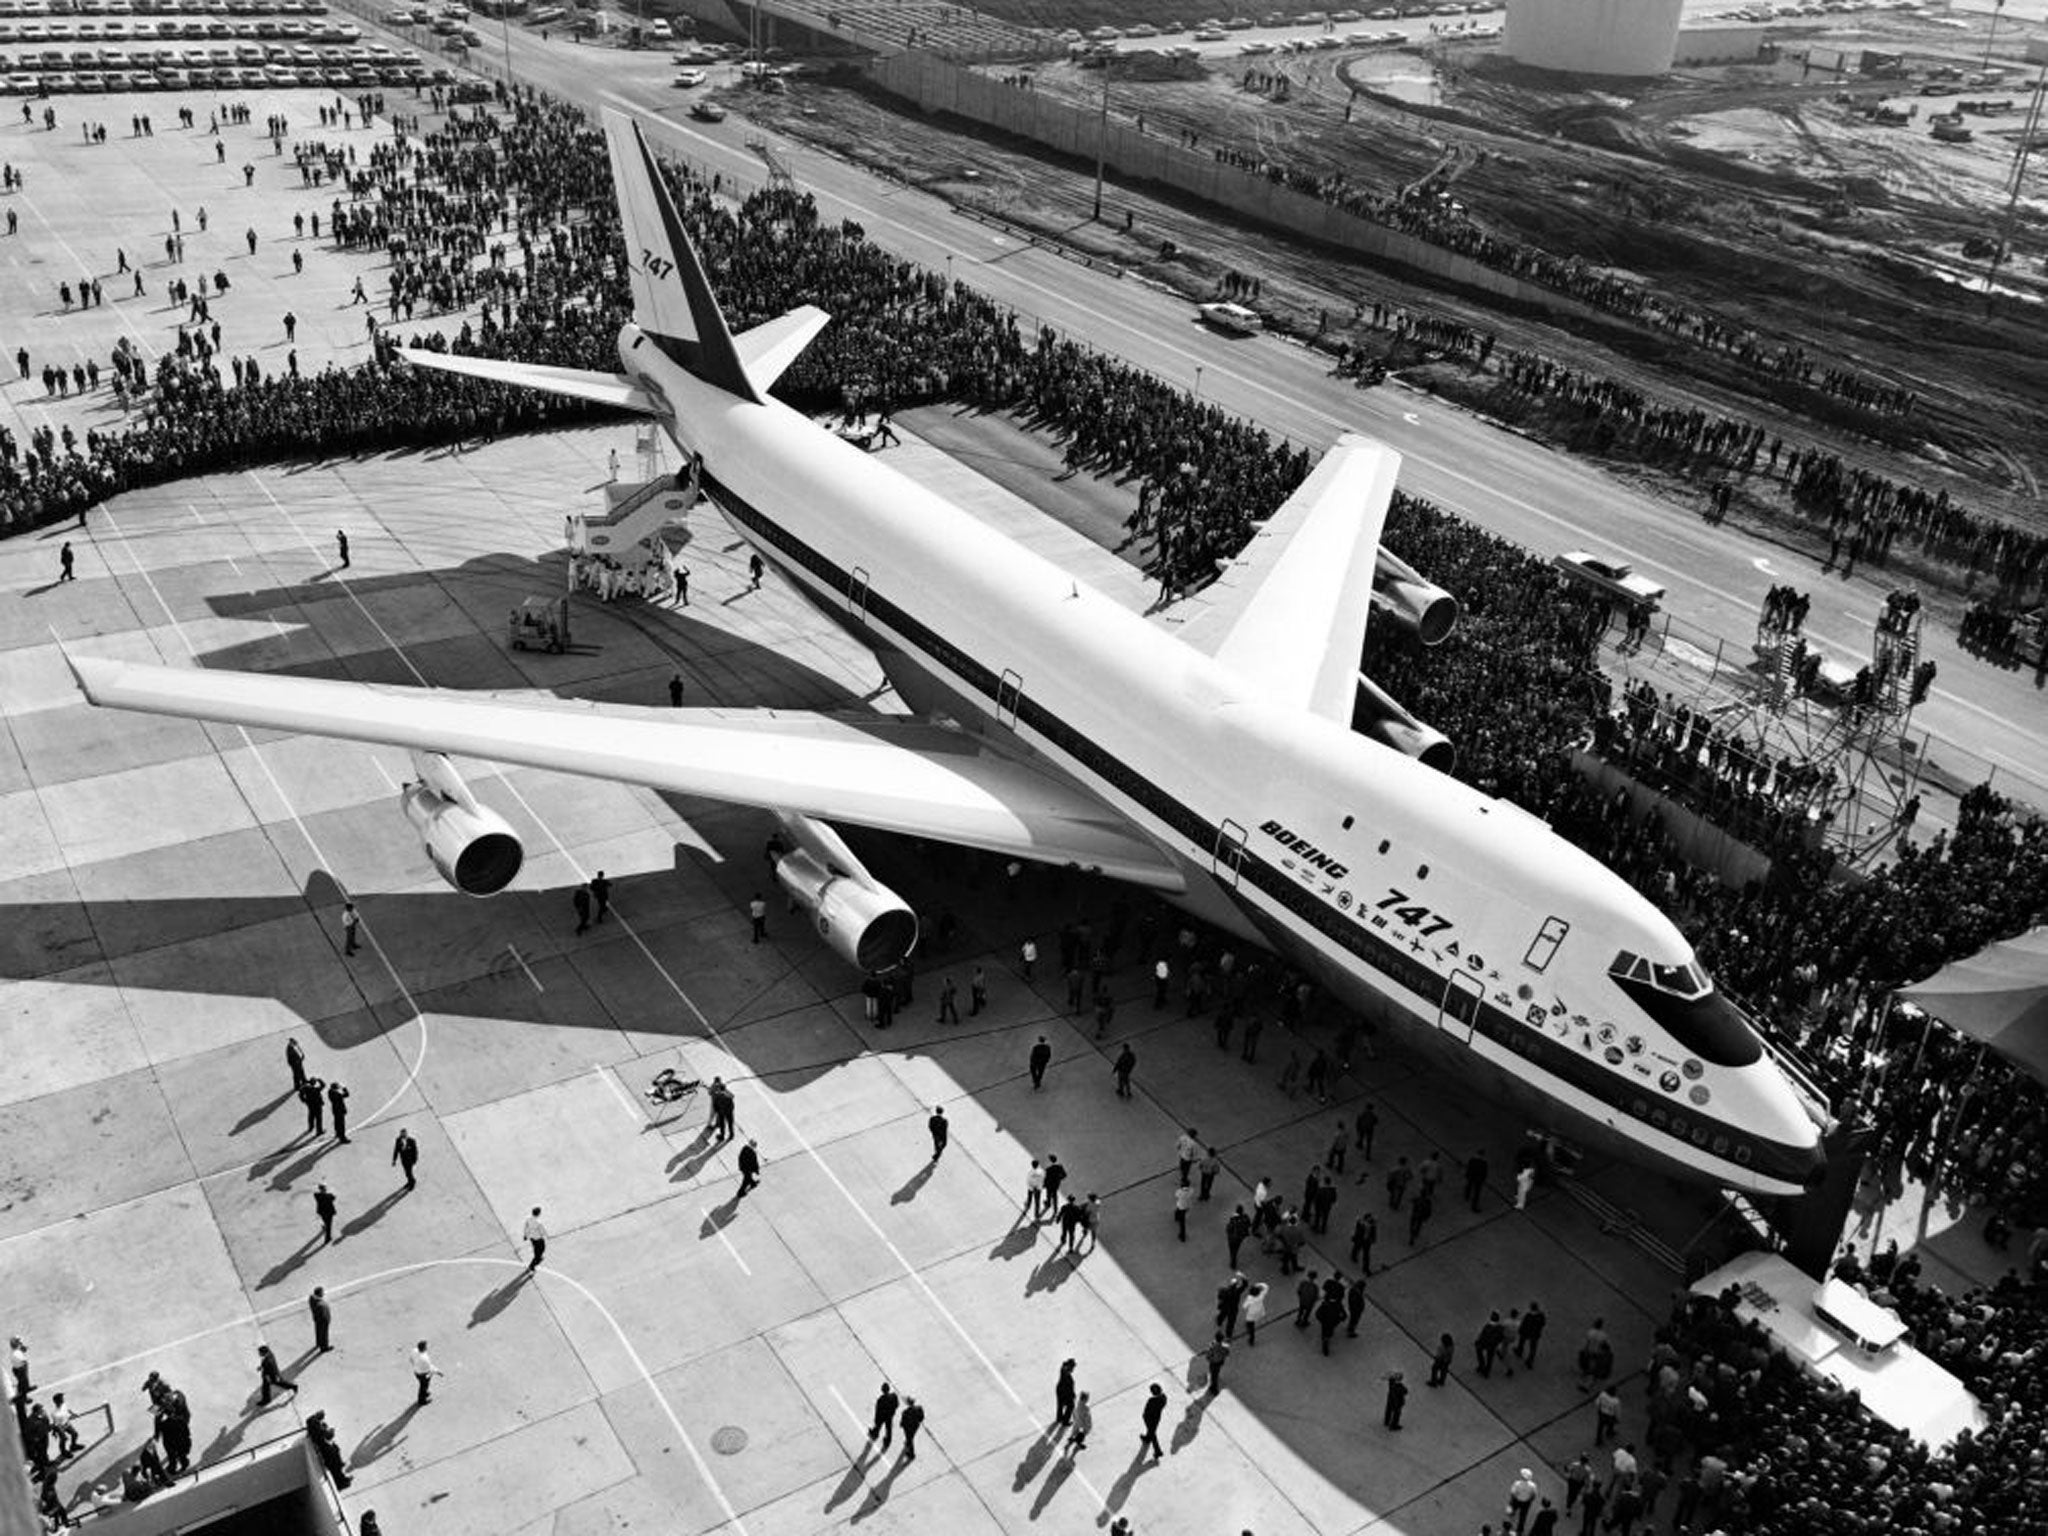 The first Boeing 747 rolls out of the Boeing plant in 1968